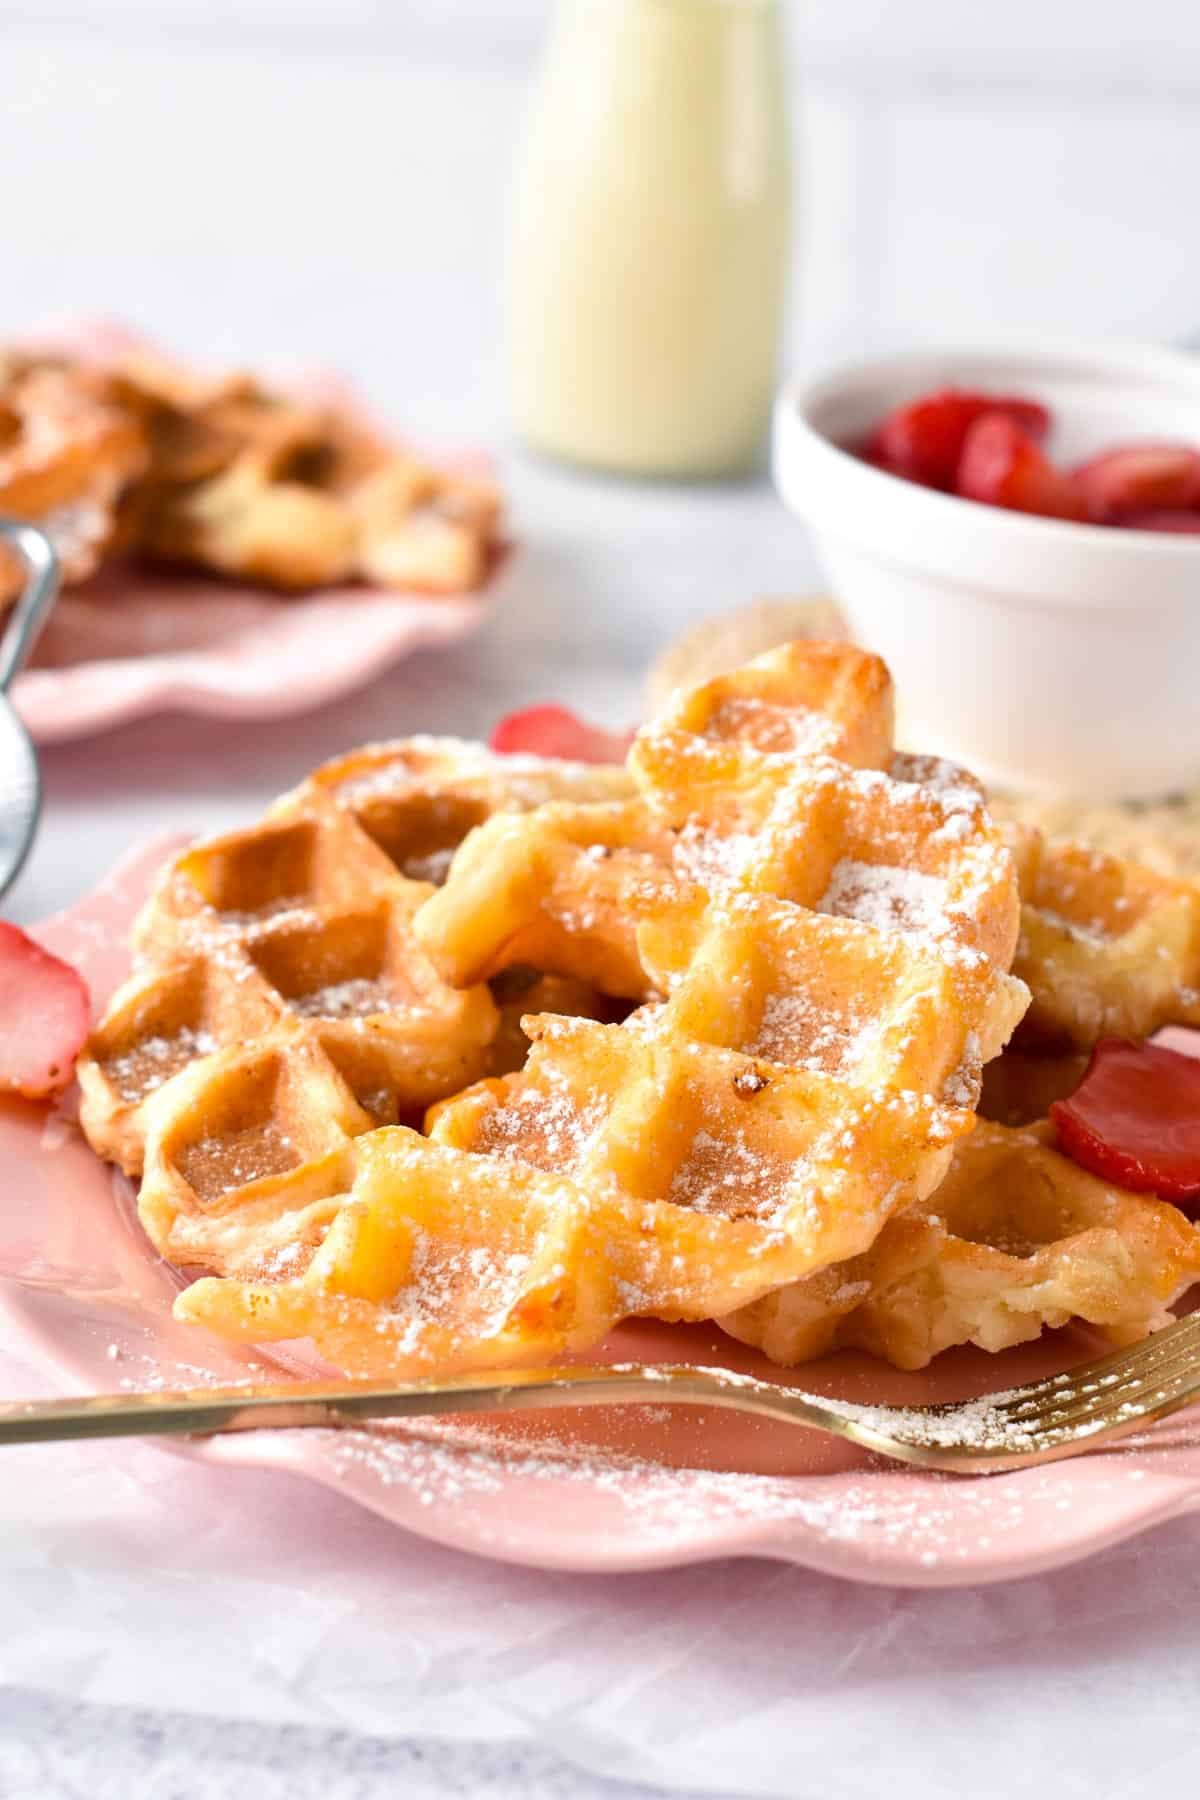 These Croffles also called croissant waffles are buttery sweet crispy waffles made with just two ingredients. If you are a waffle and a croissant lover for breakfast, this recipe is a must-try.These Croffles also called croissant waffles are buttery sweet crispy waffles made with just two ingredients. If you are a waffle and a croissant lover for breakfast, this recipe is a must-try.